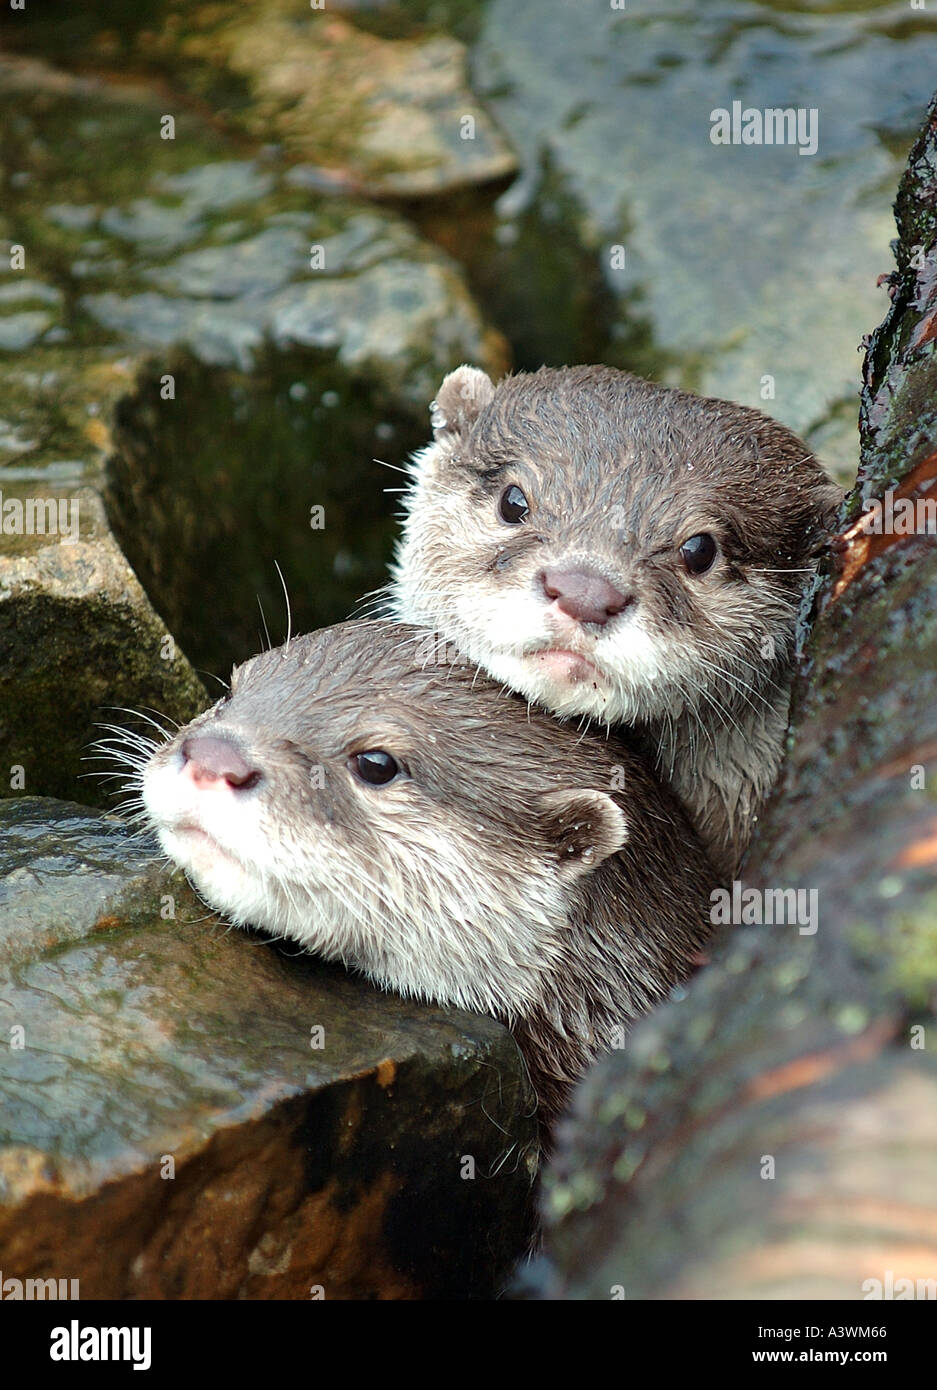 Oriental small clawed otter aonyx cinerea s e asia Stock Photo